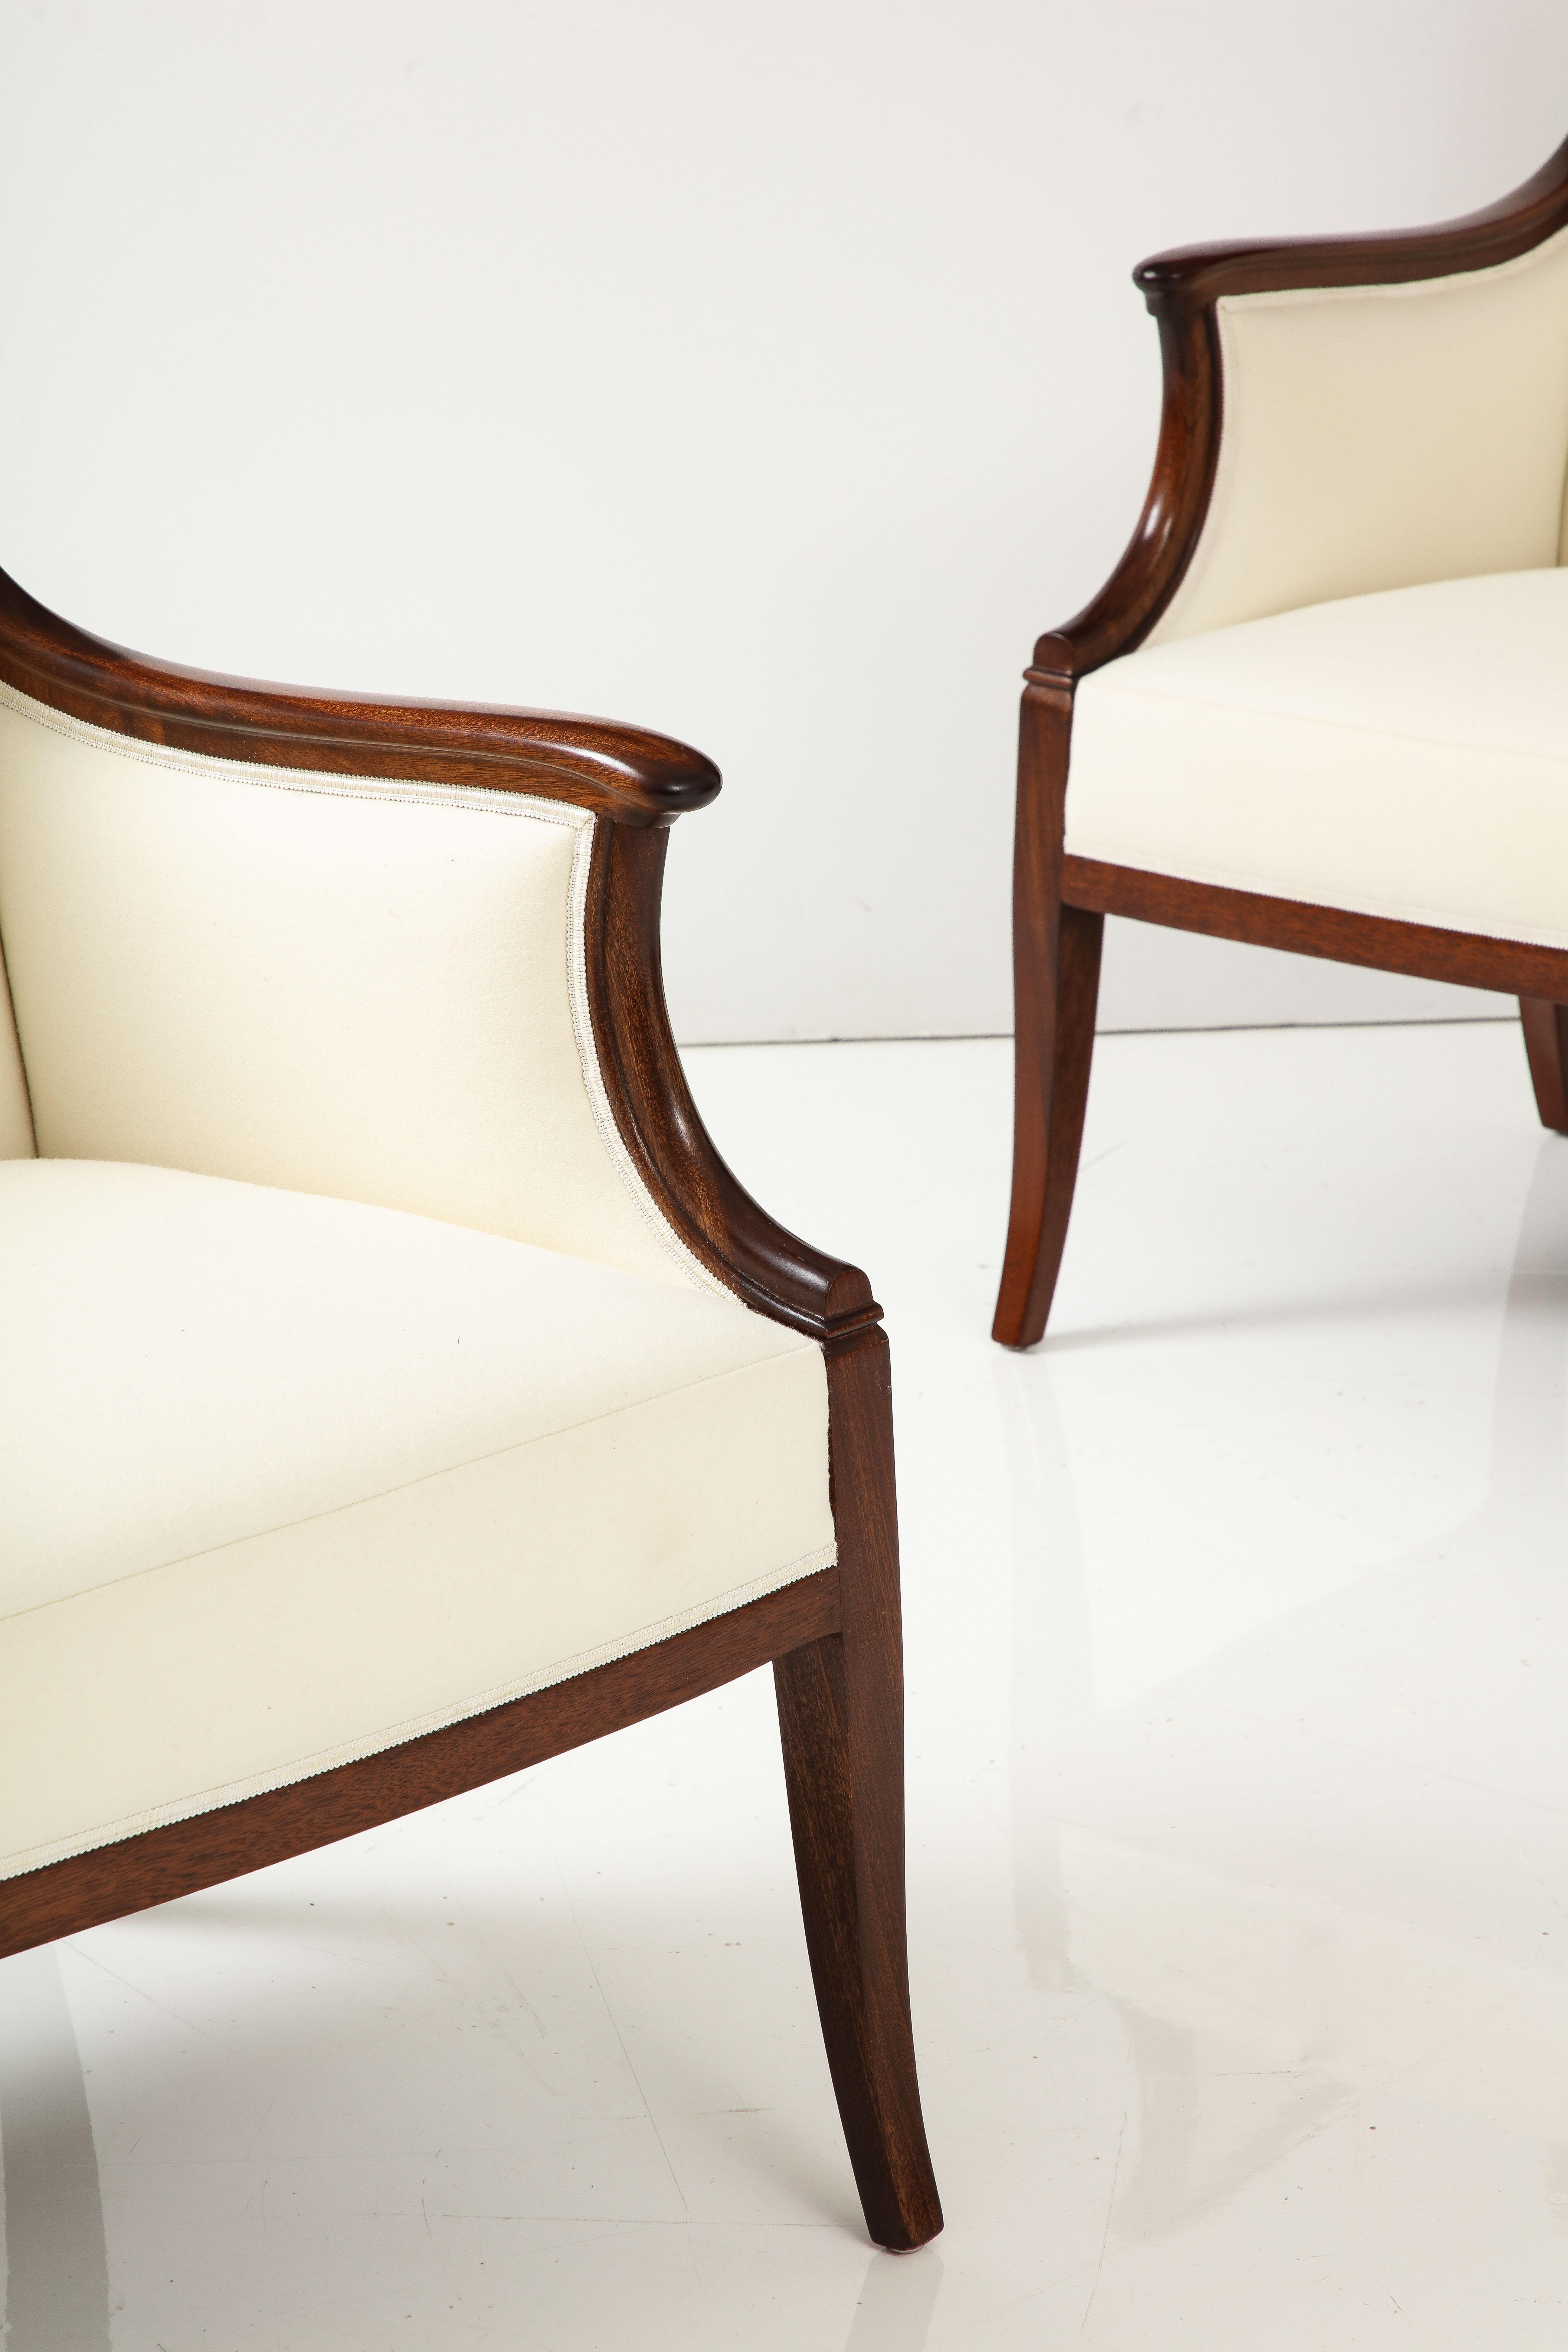 Pair of Frits Henningsen Mahogany Armchairs, circa 1940s For Sale 6